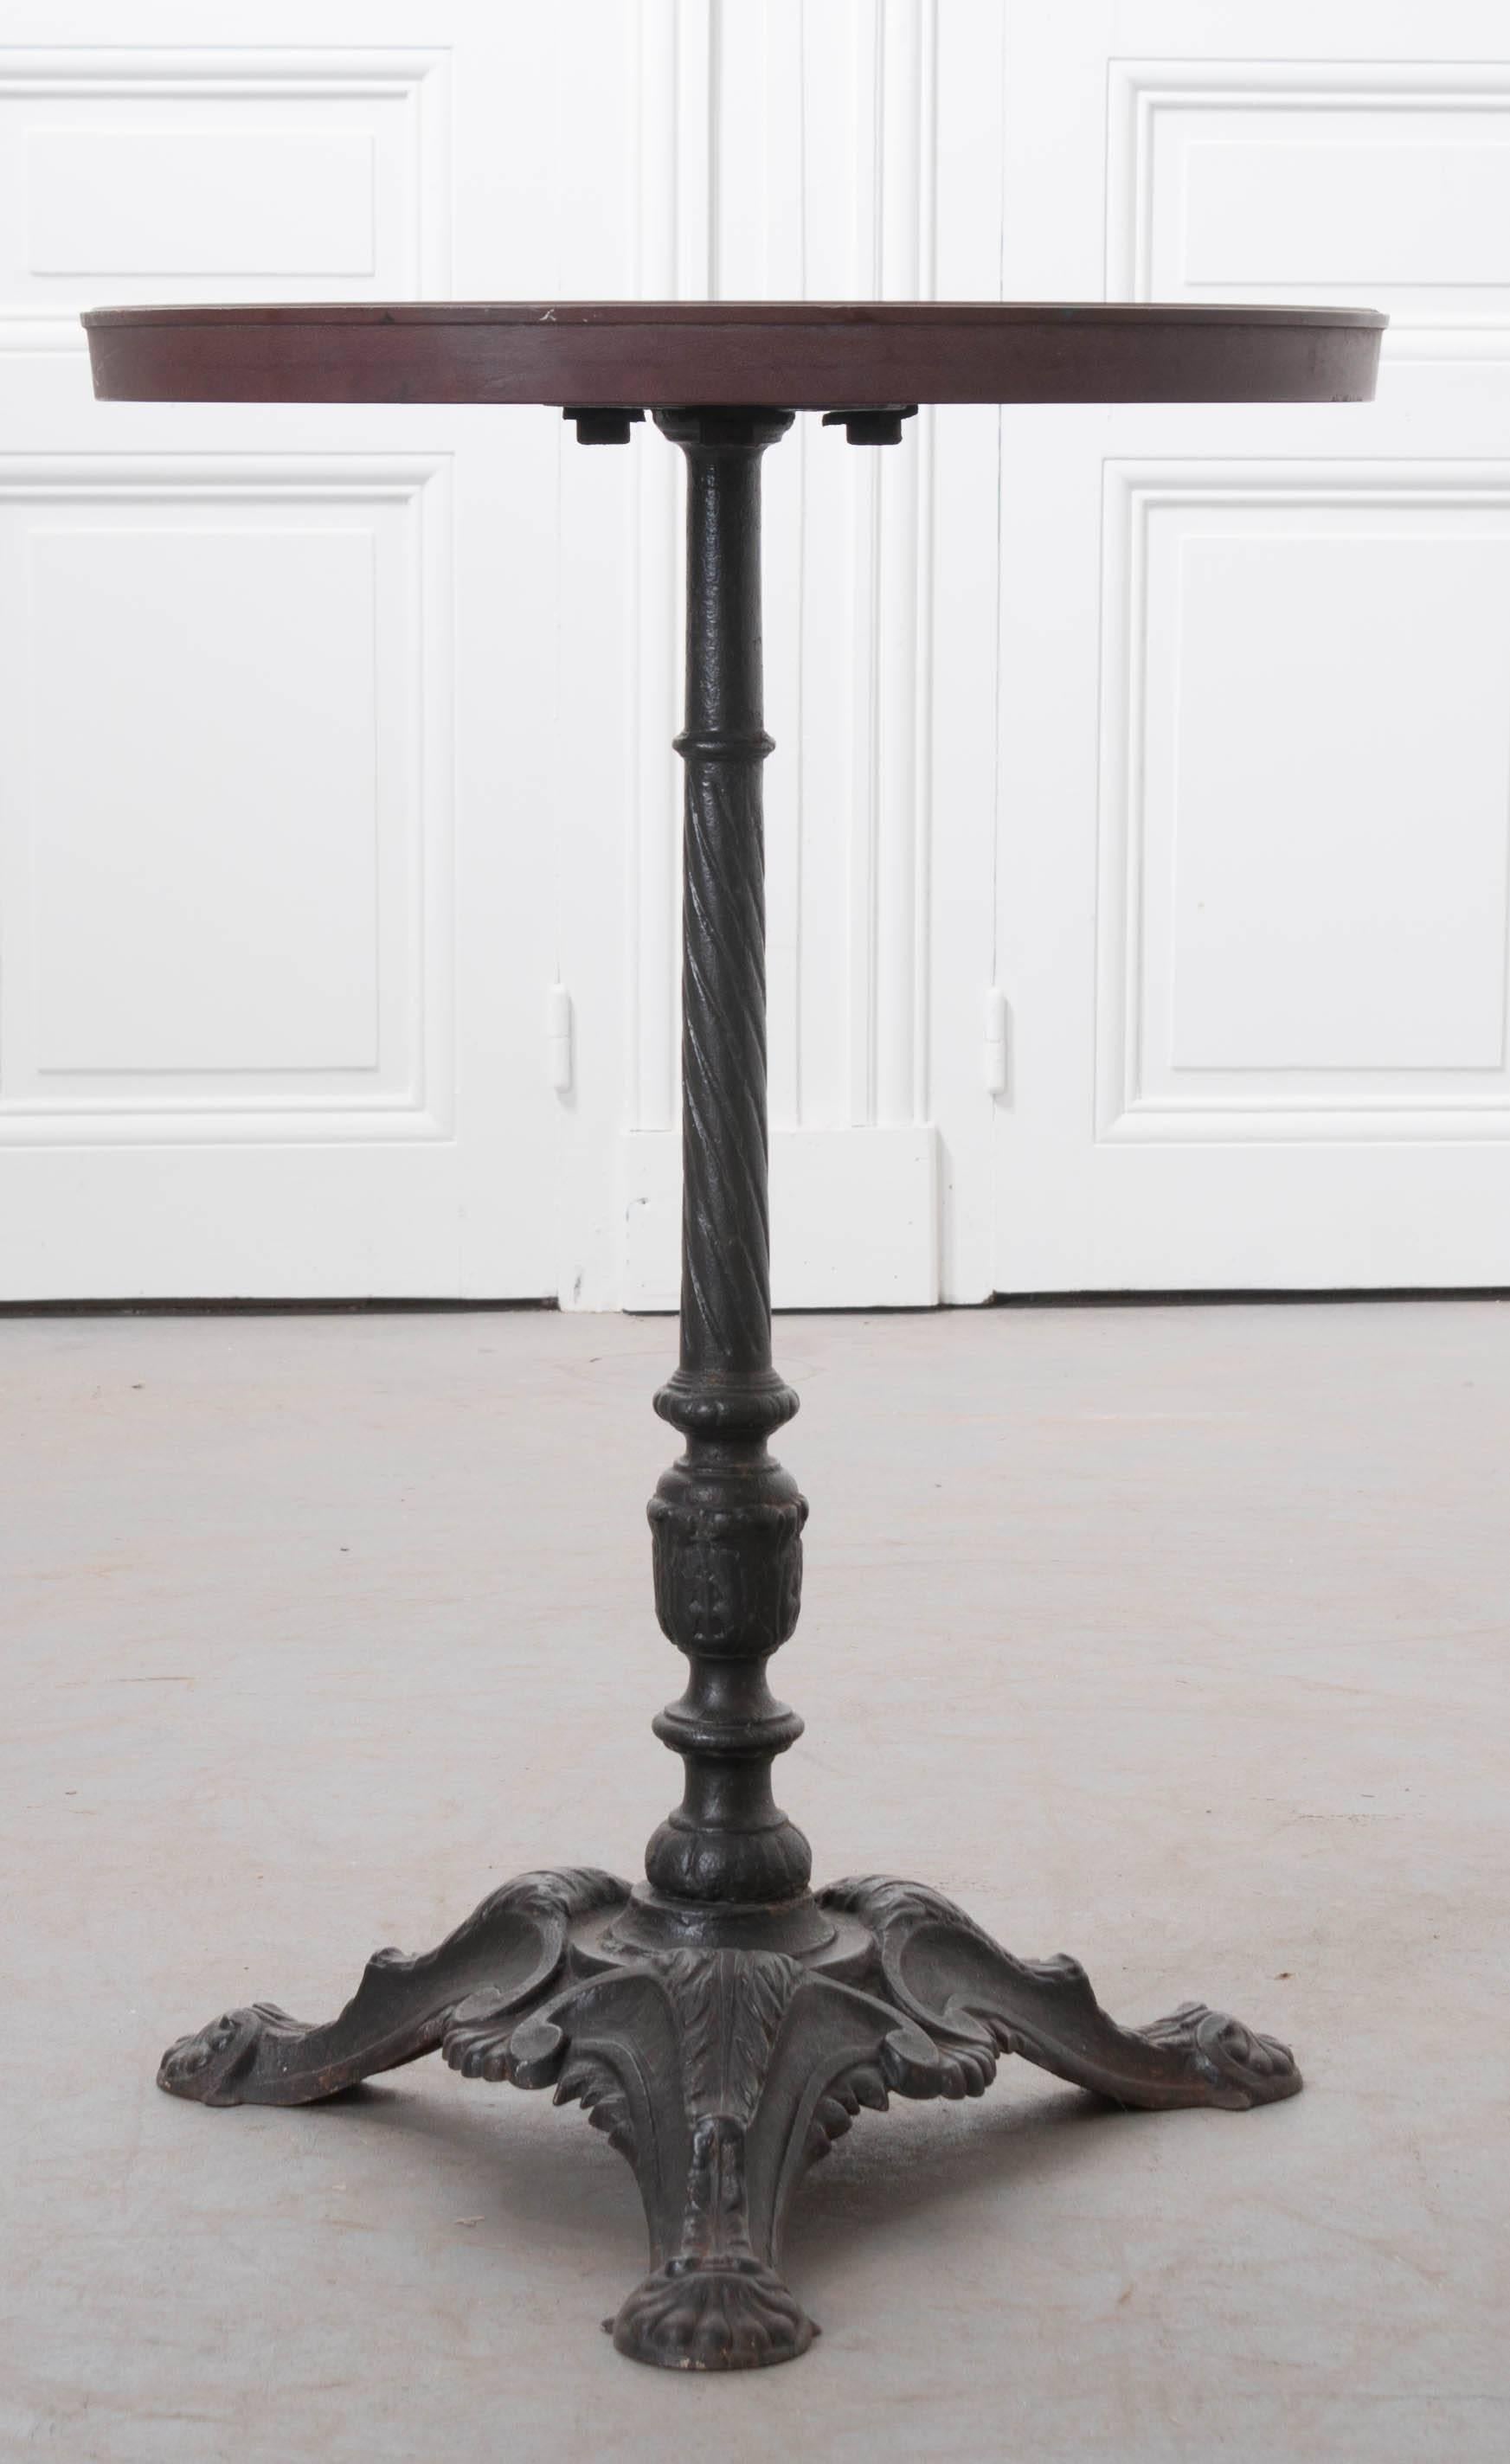 An excellent cast iron bistro table from 1920s, France. The iron tripod base is done with a Classic styling and has a marvellously aged patina. The burgundy colored top is newer and was added to the base after the table was originally made. This